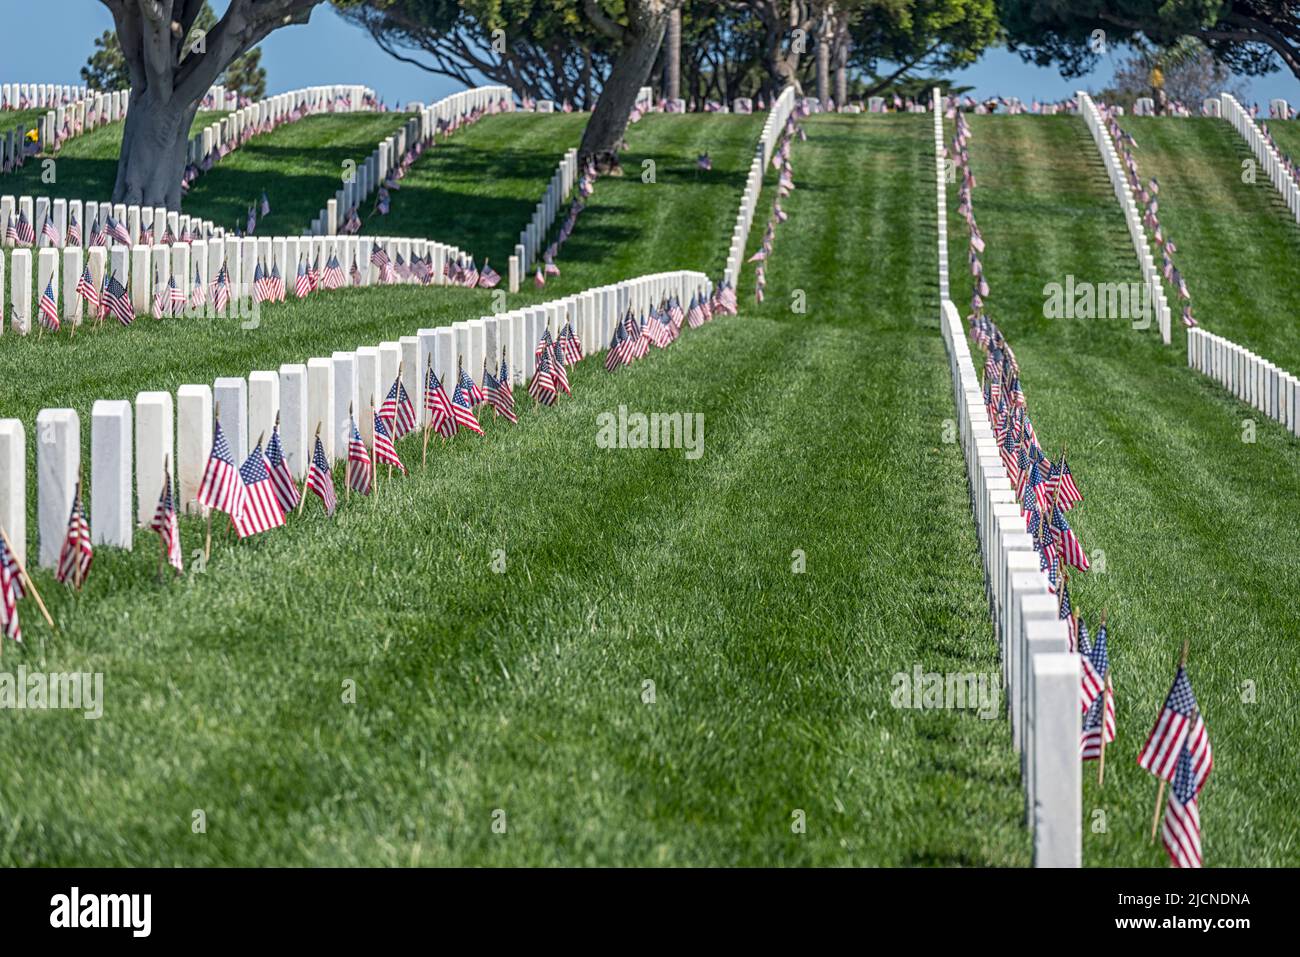 American flags set out for Memorial Day at Fort Rosecrans National Cemetery. San Diego, California, USA. Stock Photo